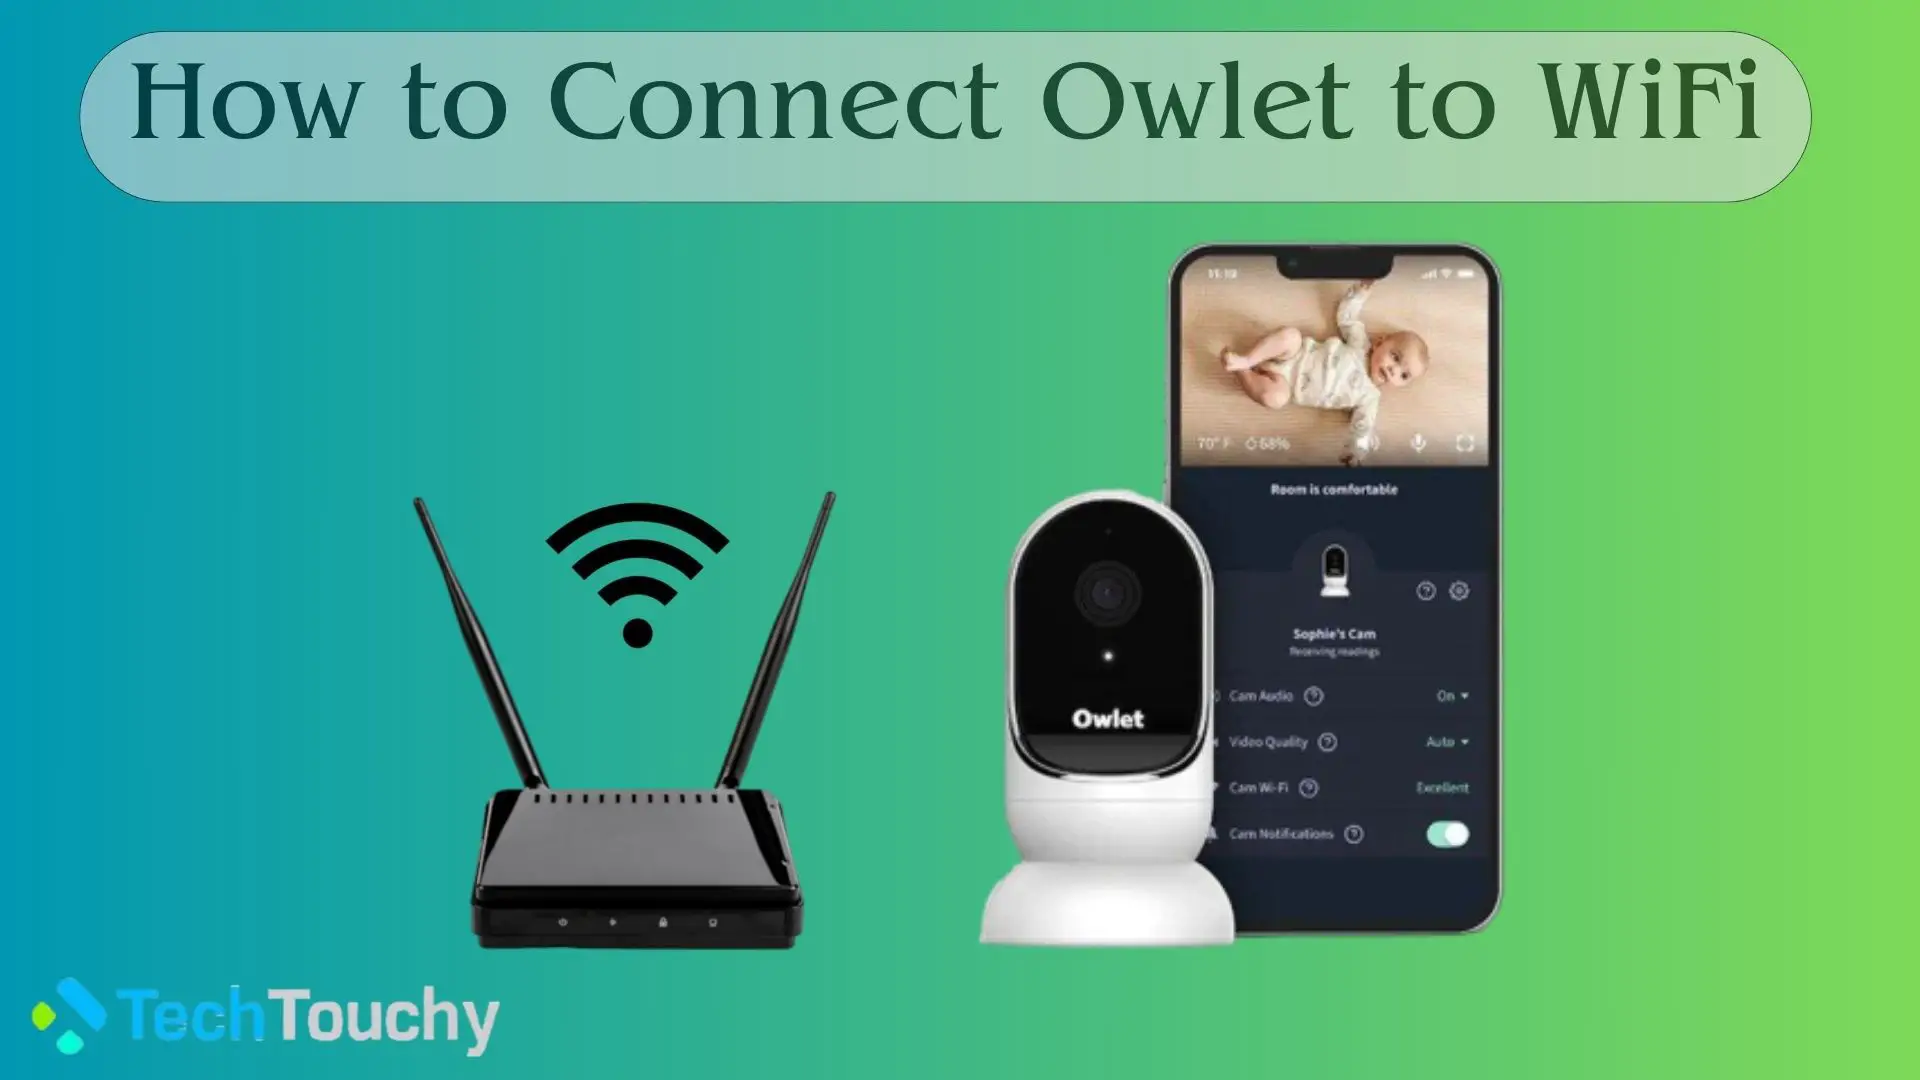 How to Connect Owlet to WiFi